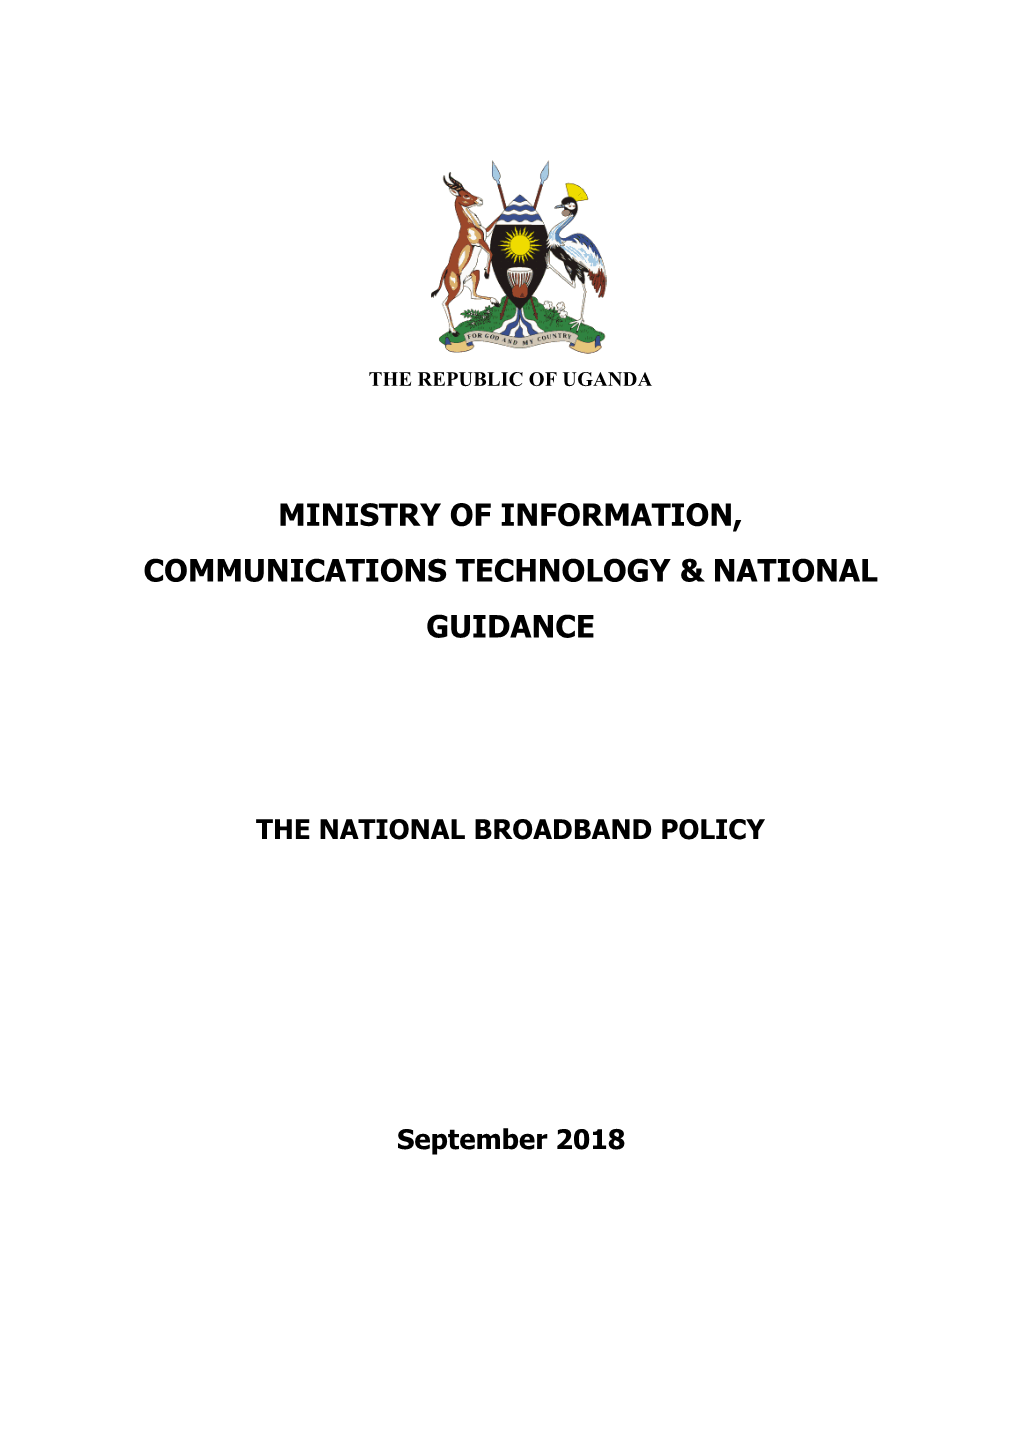 Ministry of Information, Communications Technology & National Guidance